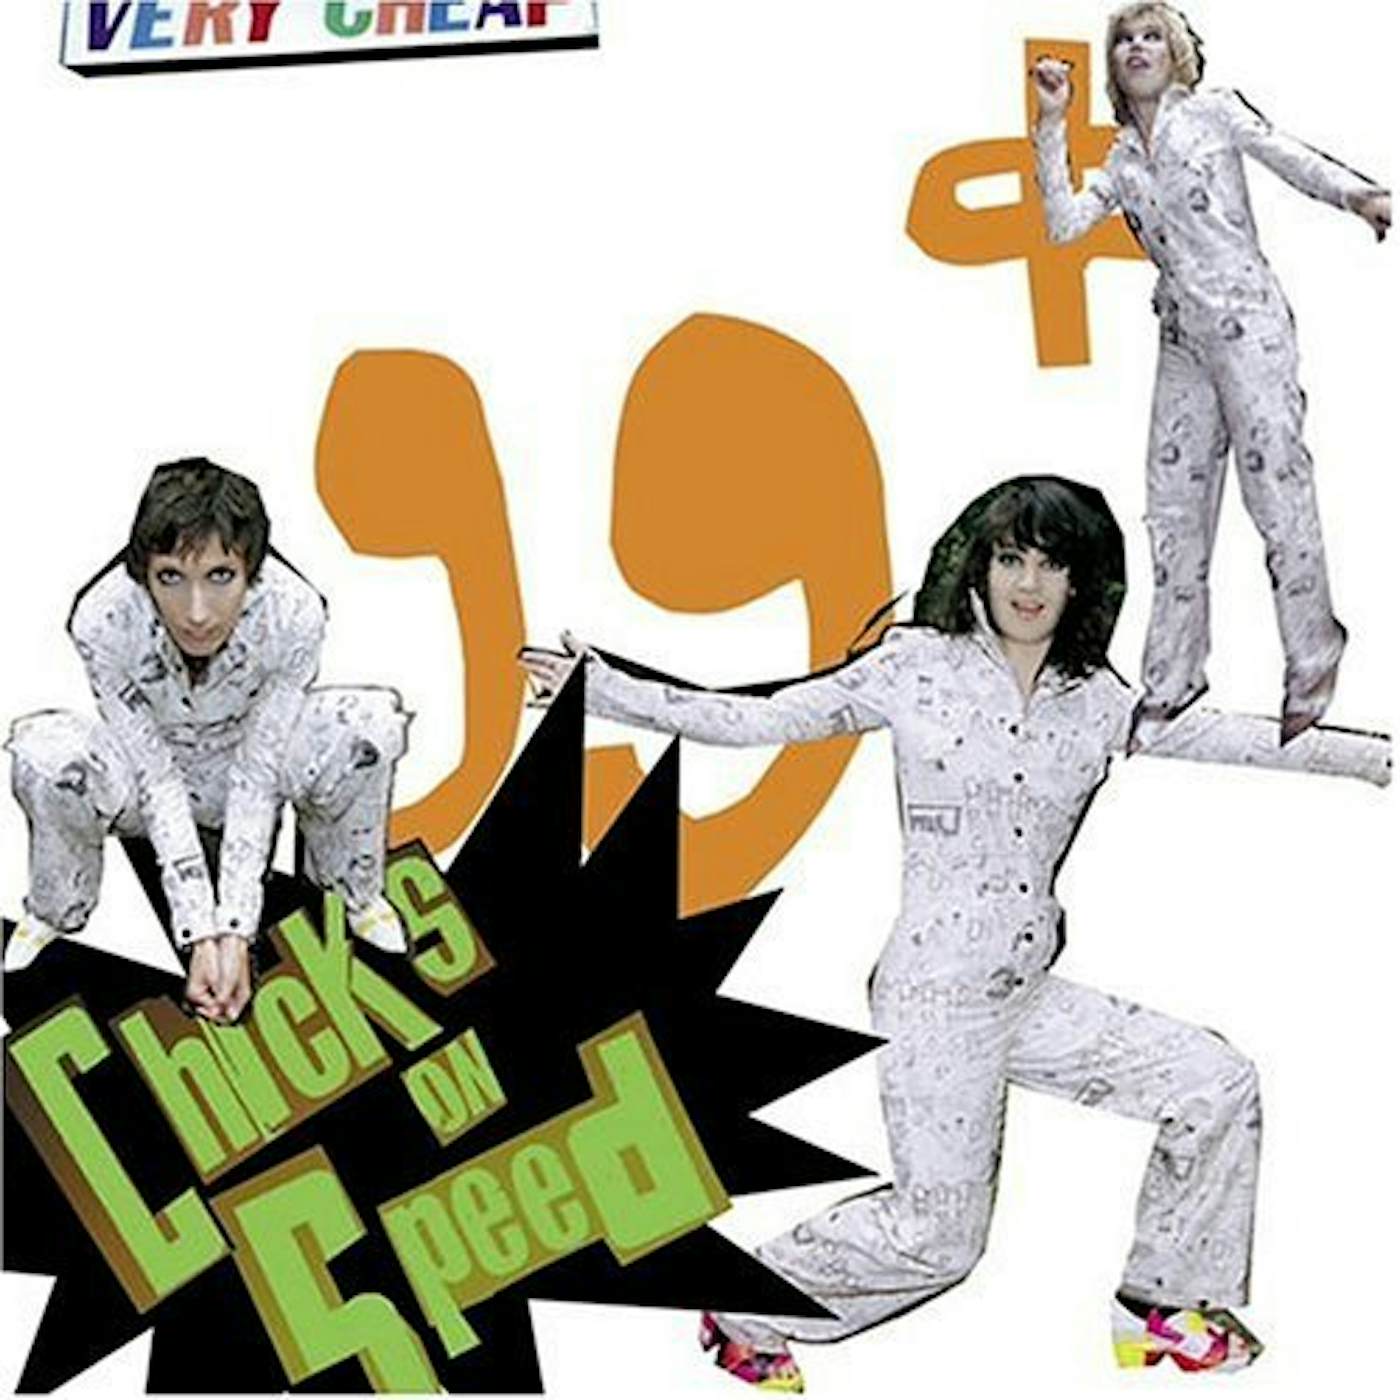 Chicks On Speed 99 CENTS CD